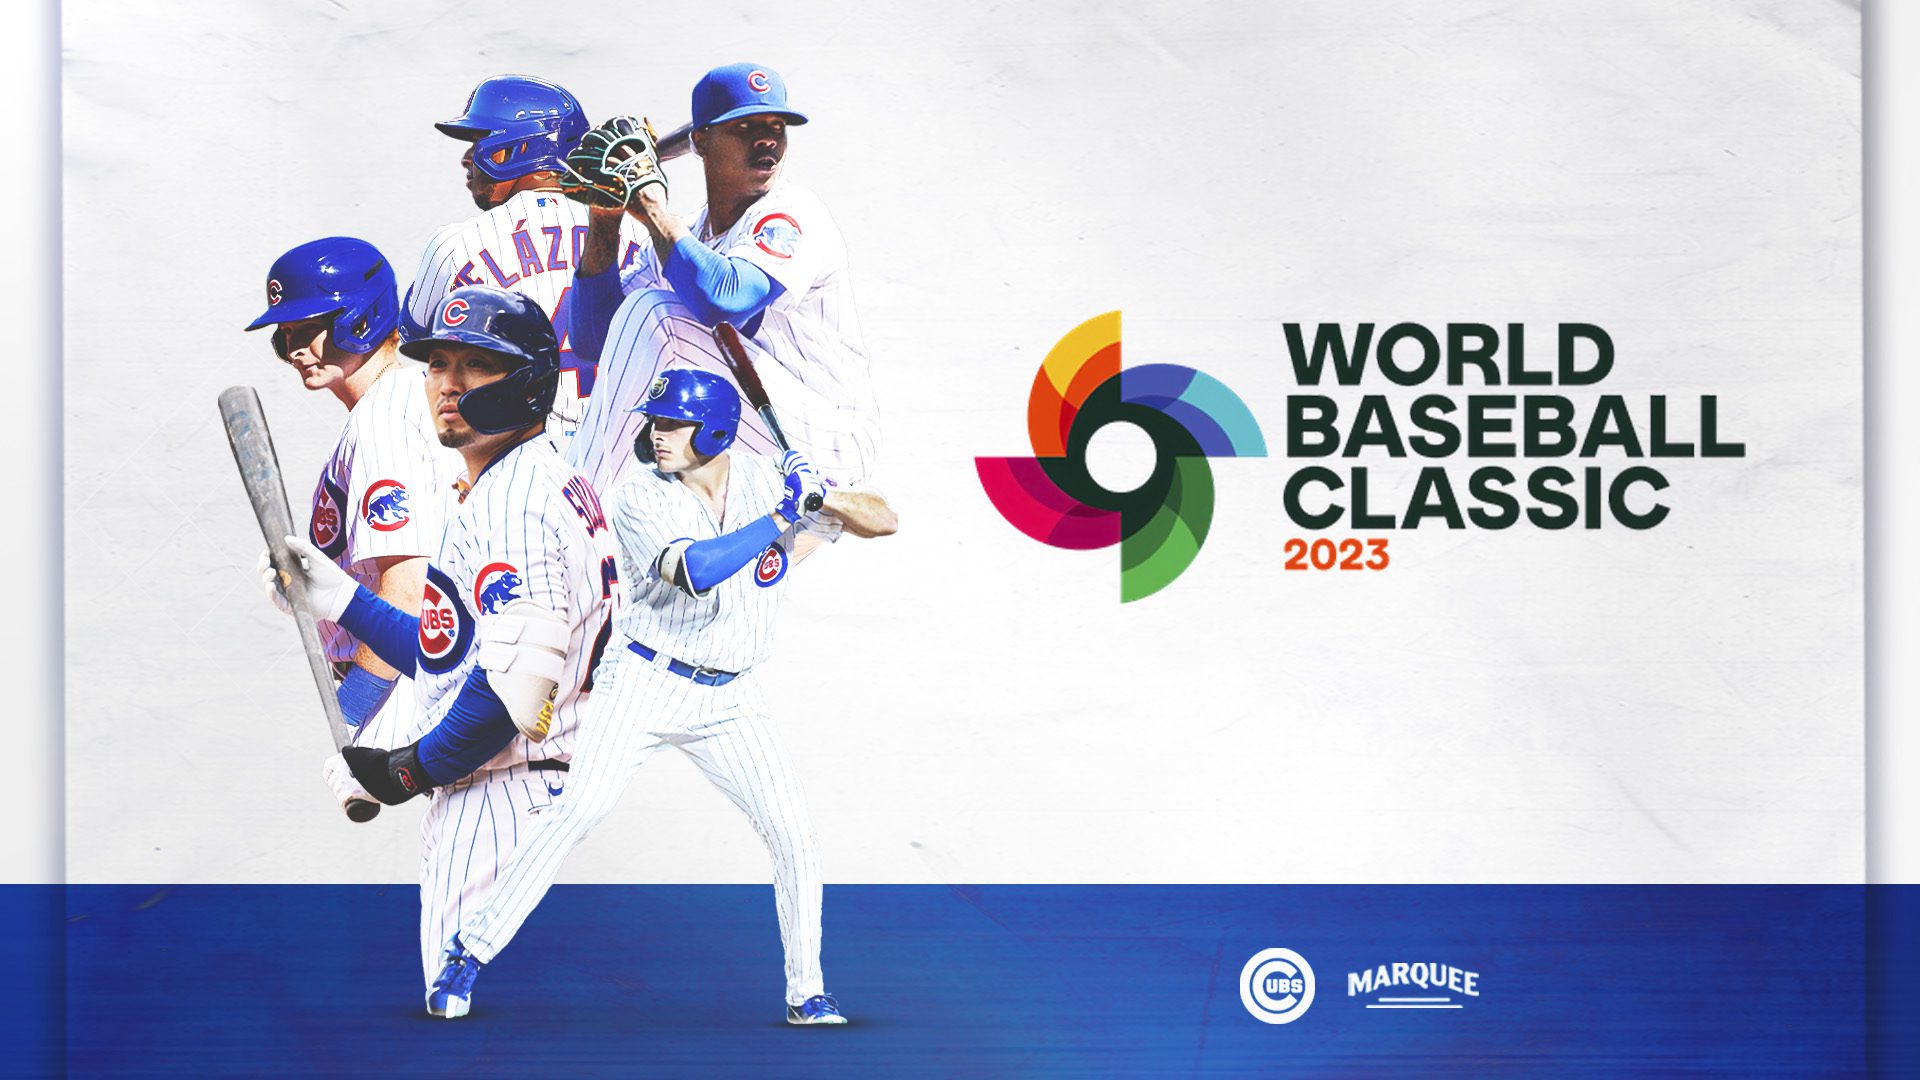 A complete list of Cubs players taking part in 2023 World Baseball Classic Sports Network